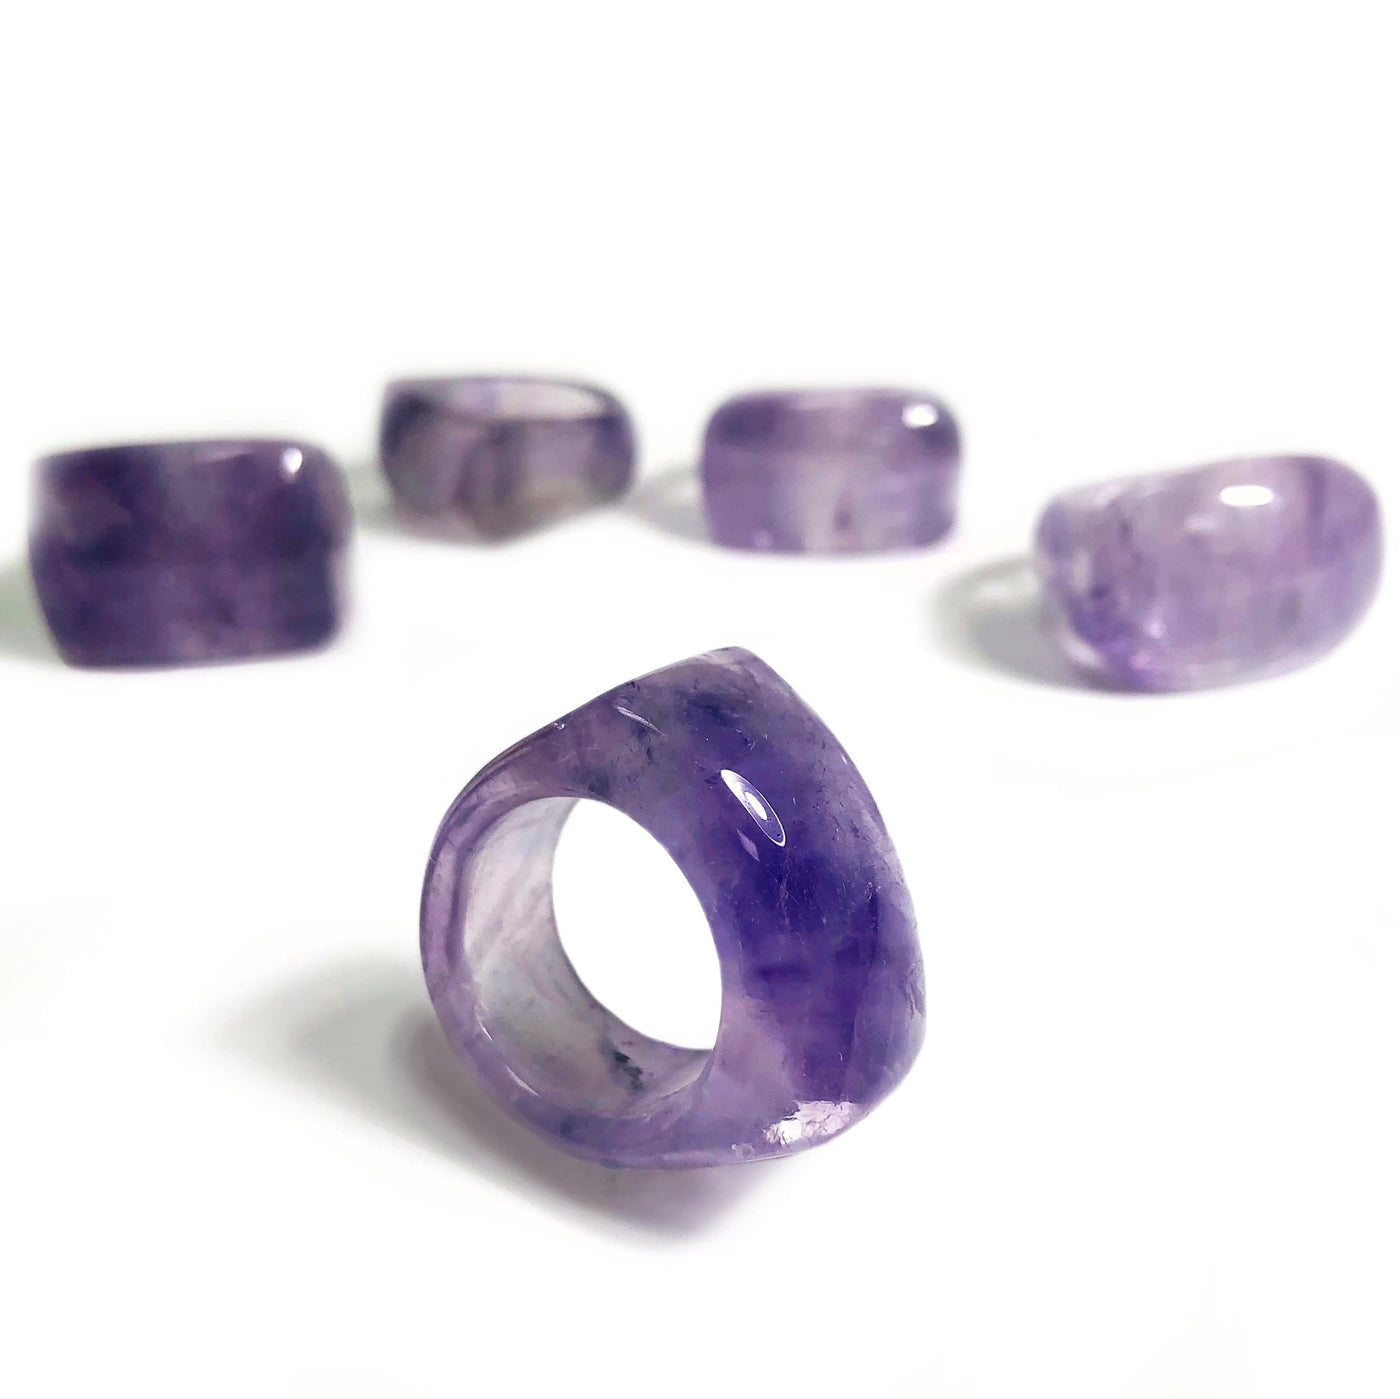 Amethyst rings on a white background.